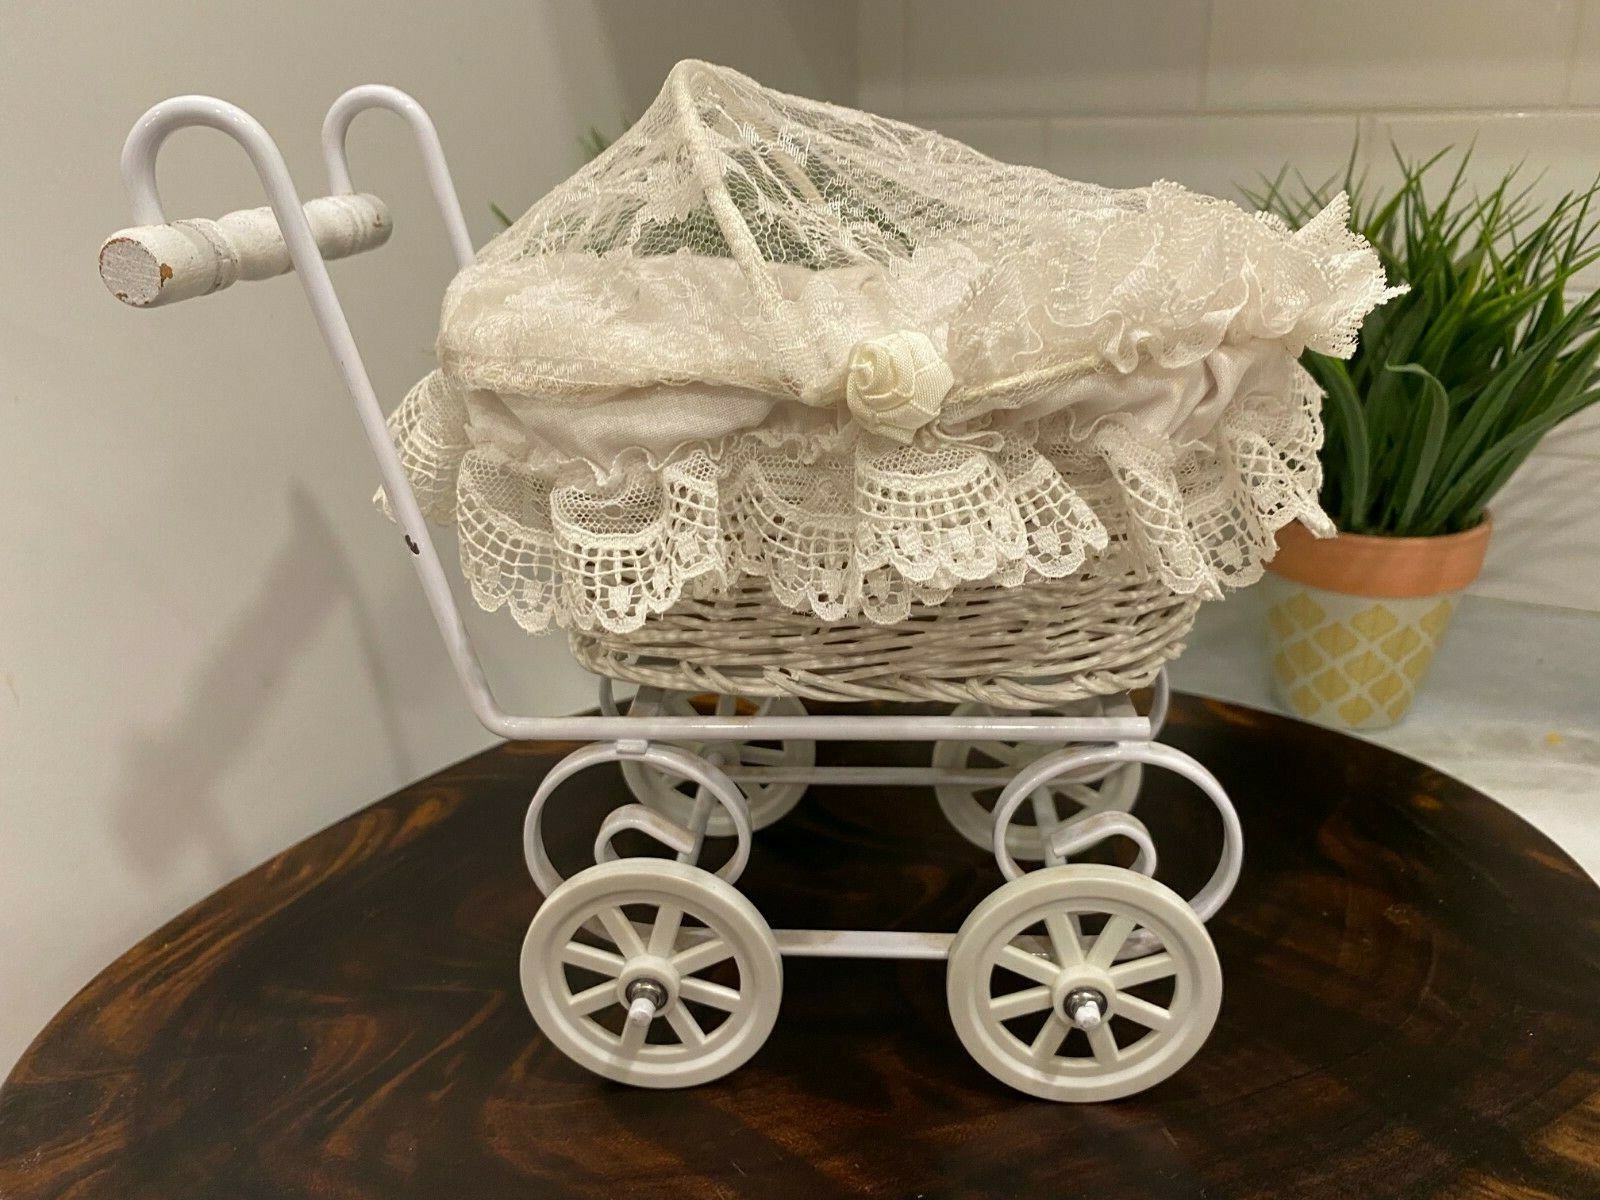 Vintage Miniature White Wicker Pram Hooded Doll Buggy Stroller Baby Carriage 